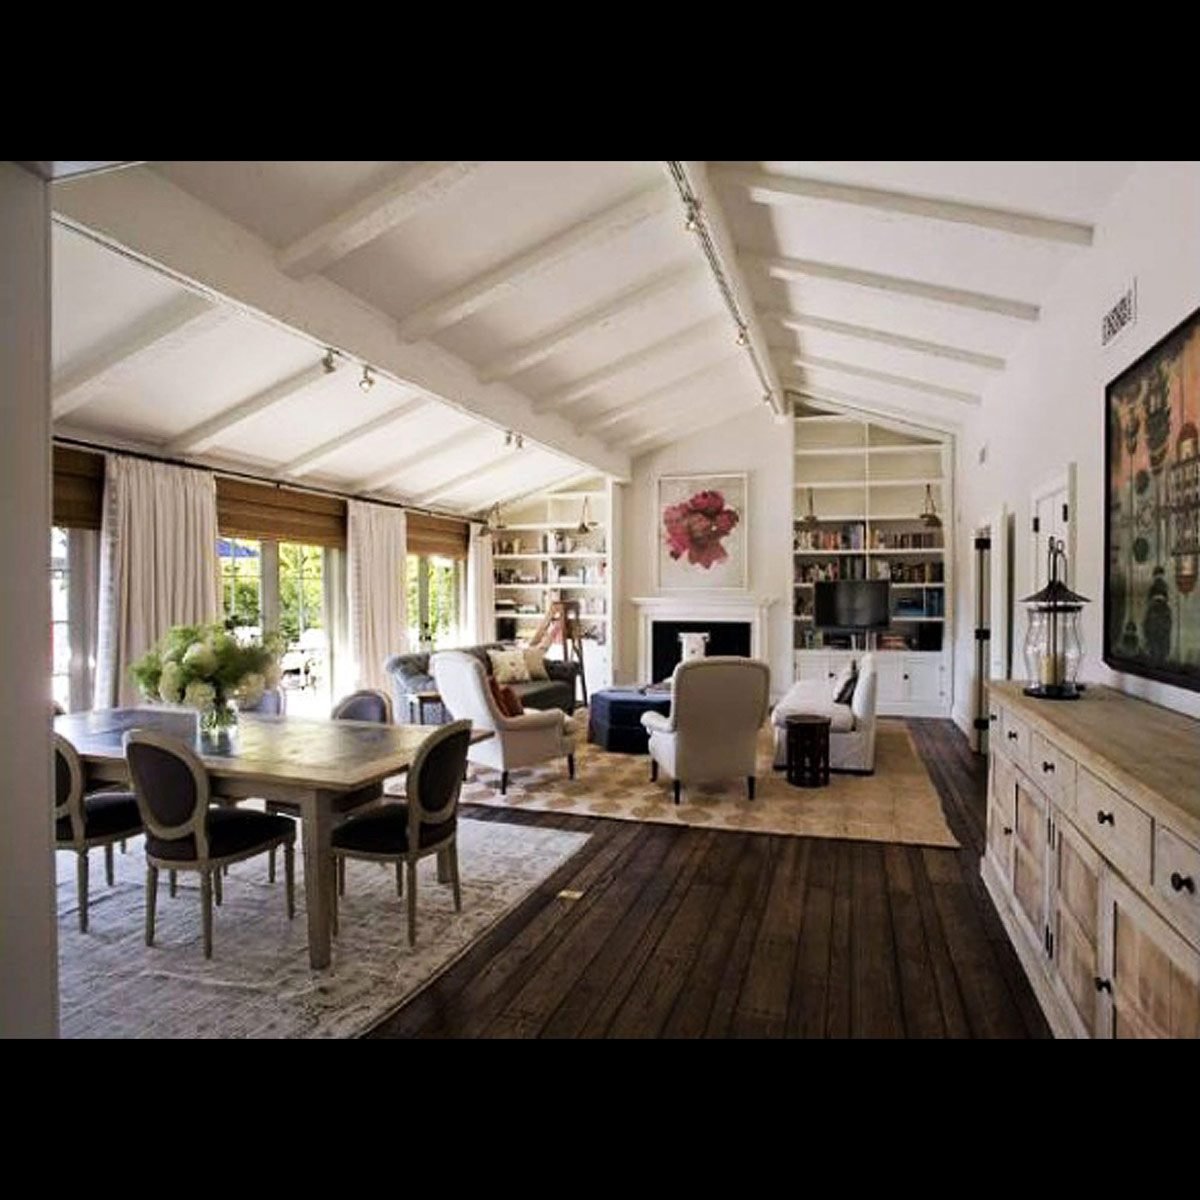 Jennifer Aniston and Justin Theroux's rental home in Los Angeles